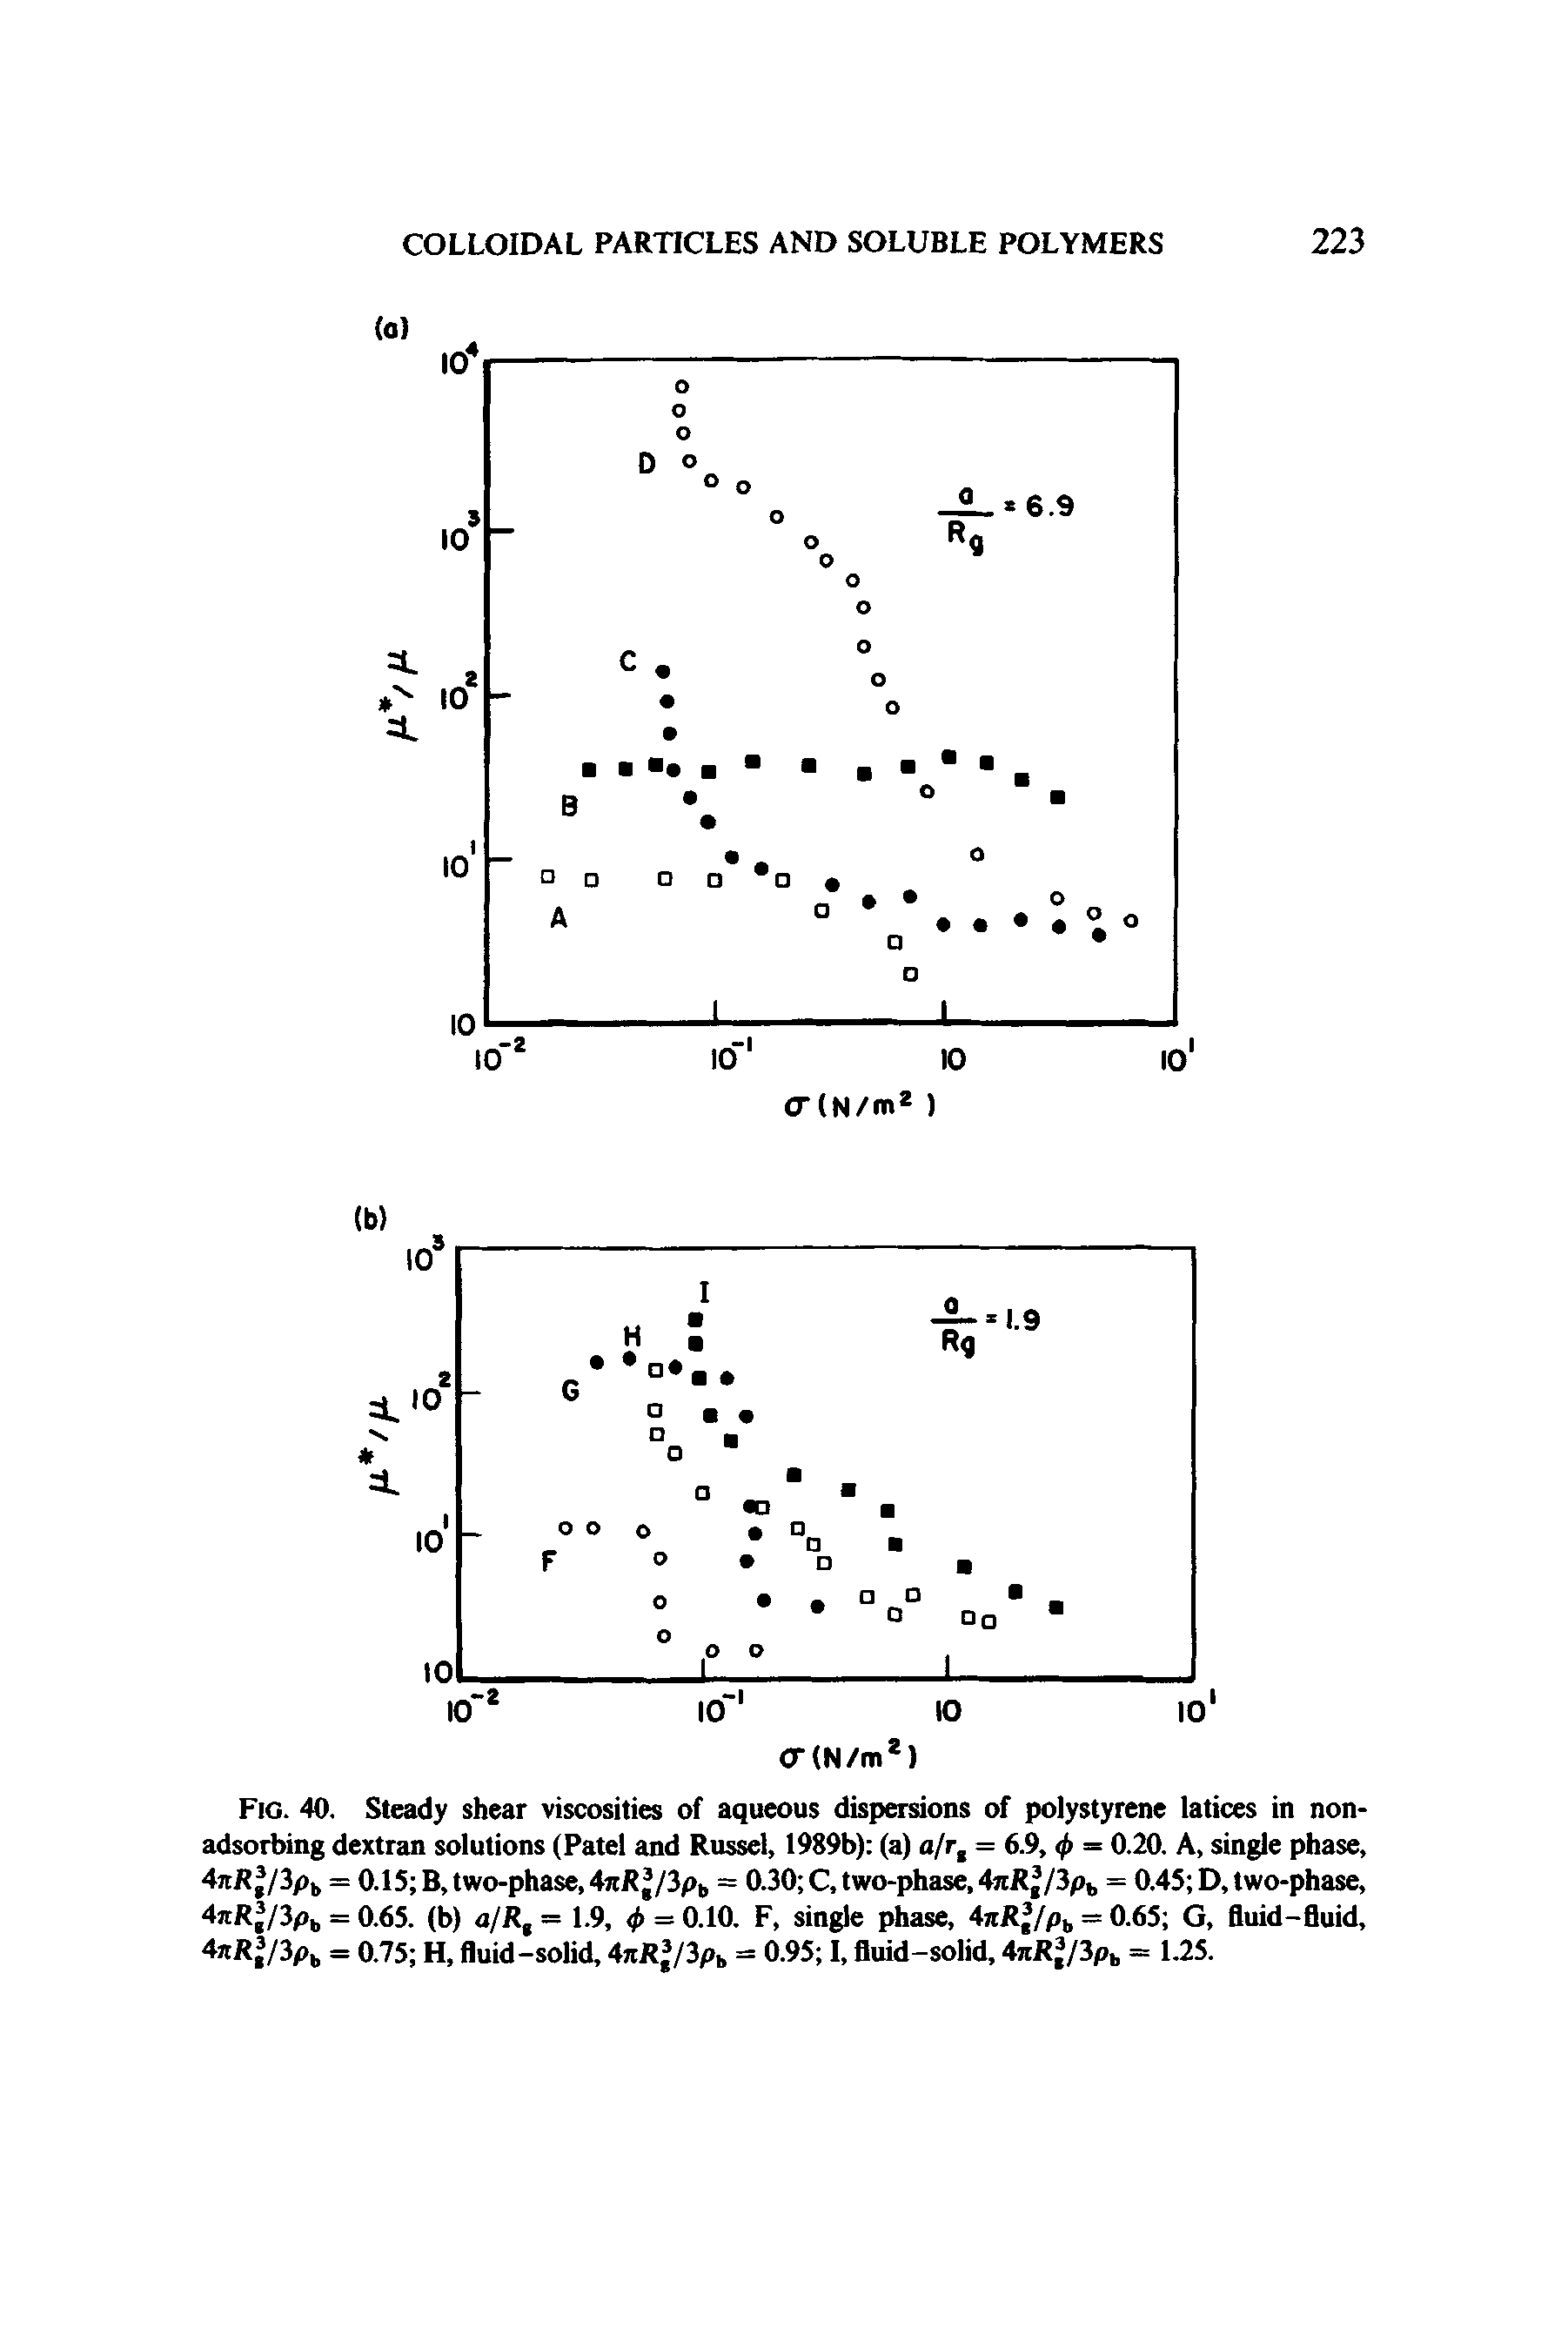 Fig. 40. Steady shear viscosities of aqueous dispersions of polystyrene latices in nonadsorbing dextran solutions (Patel and Russel, 1989b) (a) a/r, = 6.9, 0 = 0.20. A, single phase, 4nR J/3pb = 0.15 B, two-phase, 4jtR /3pb = 0.30 C, two-phase, 4jtRj/3pb = 0.45 D, two-phase, 4jtRj/3pb = 0.65. (b) a/R, = 1.9, 0 = 0.10. F, single phase, 4jtR /pb = 0.65 G, fluid-fluid, 4jtR /3pb = 0.75 H, fluid-solid, 4nR /3p = 0.95 I, fluid-solid, 4jiR3/3p = 1.25.